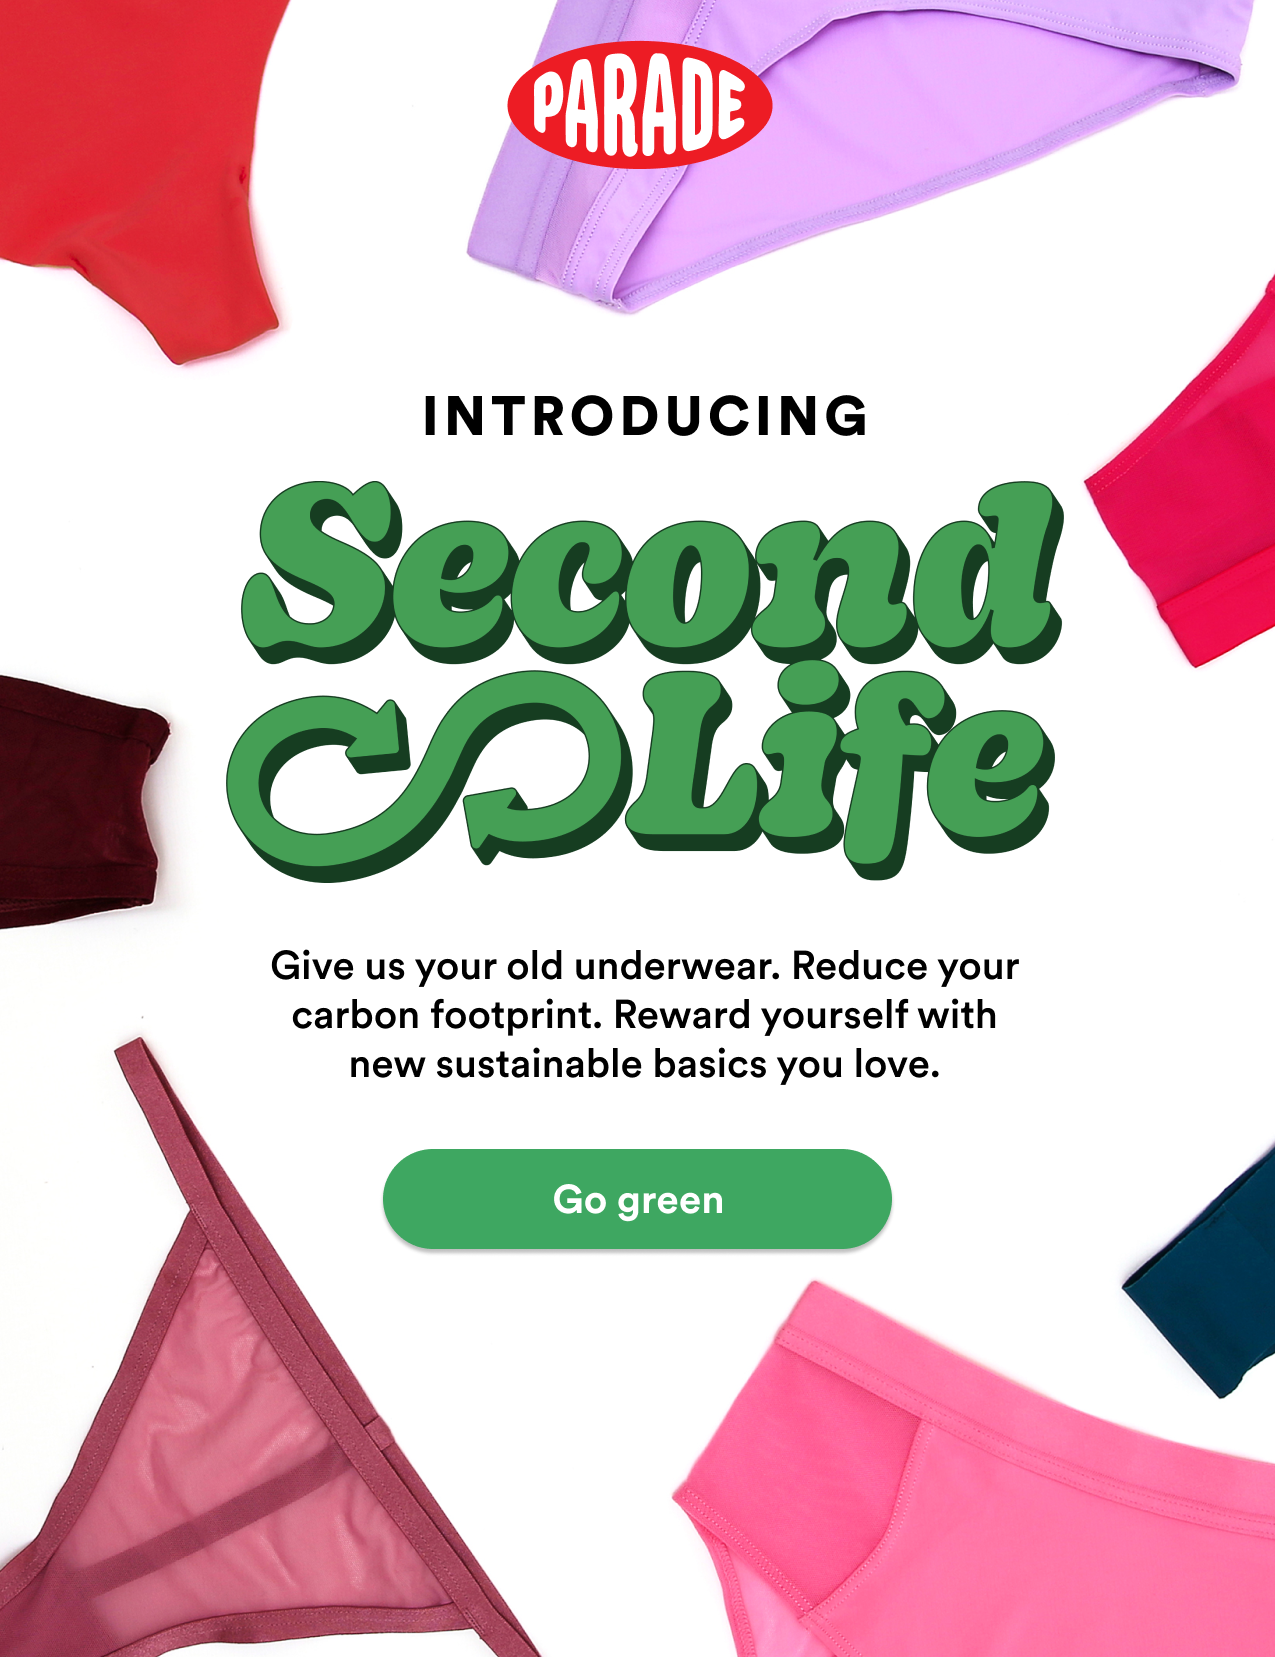 Second Life by Parade is back! It's our underwear recycling program keeps  your old pairs out of landfills and turns them into something…